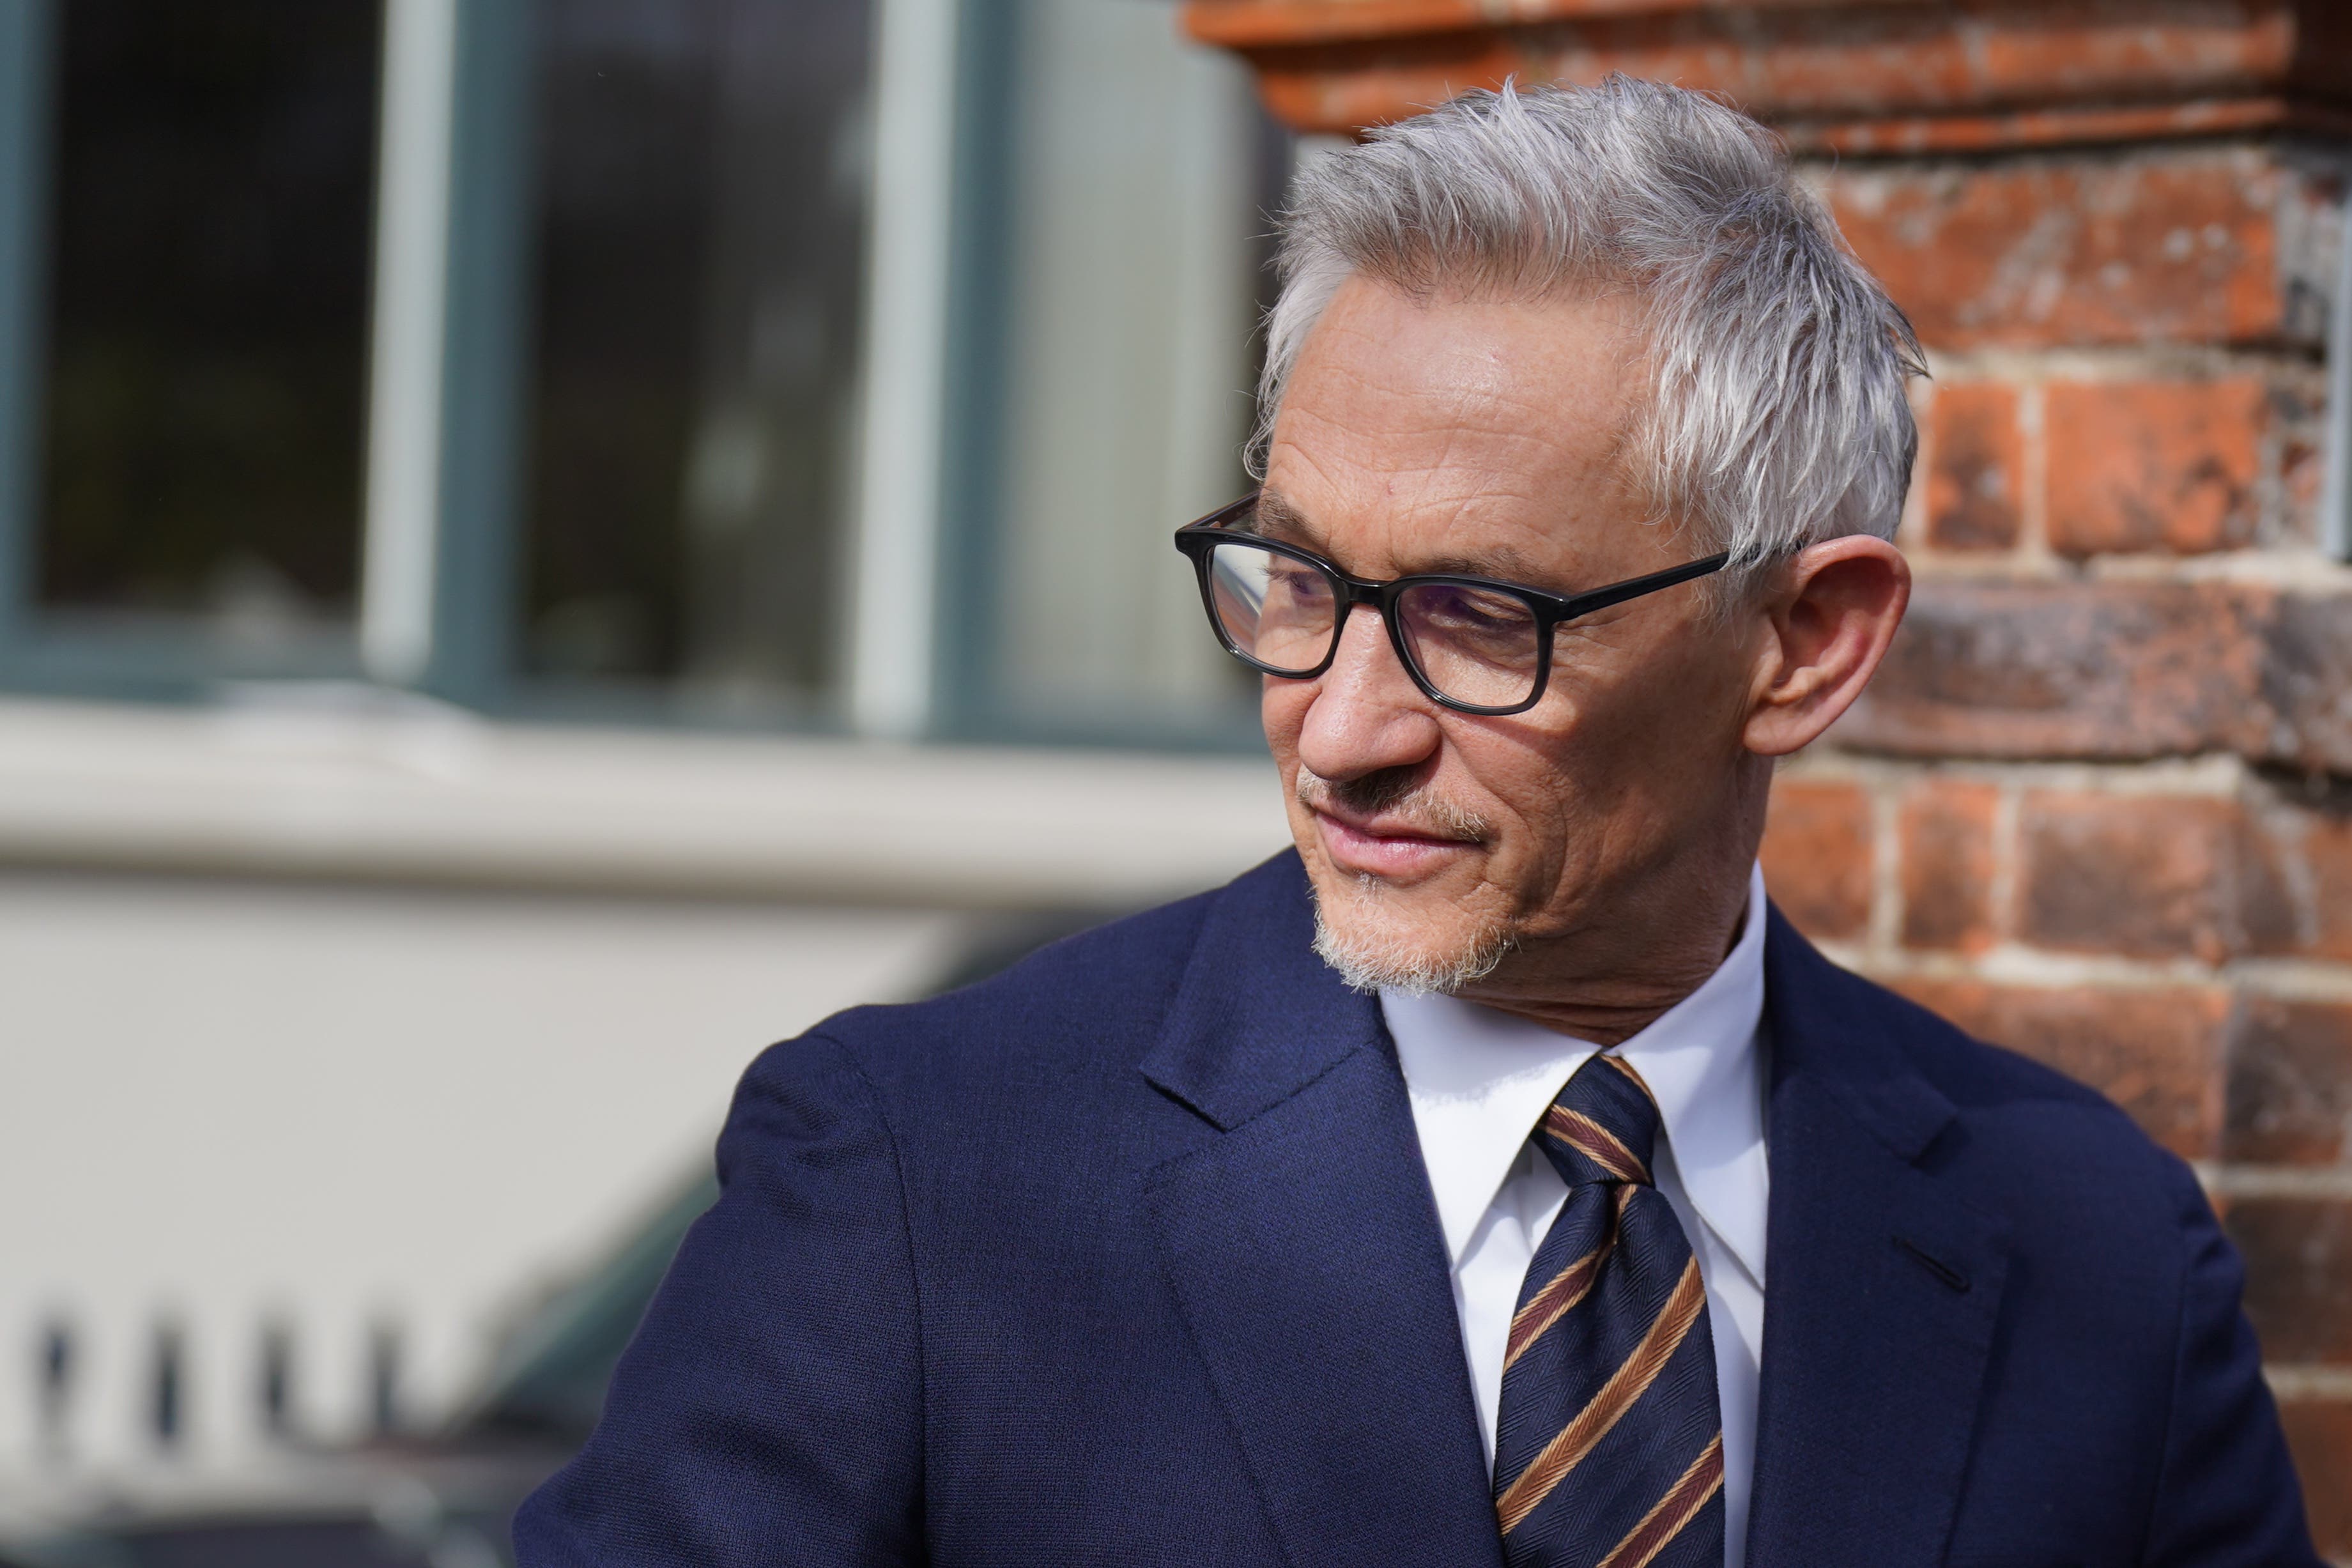 Match Of The Day host Gary Lineker outside his home in London on Saturday